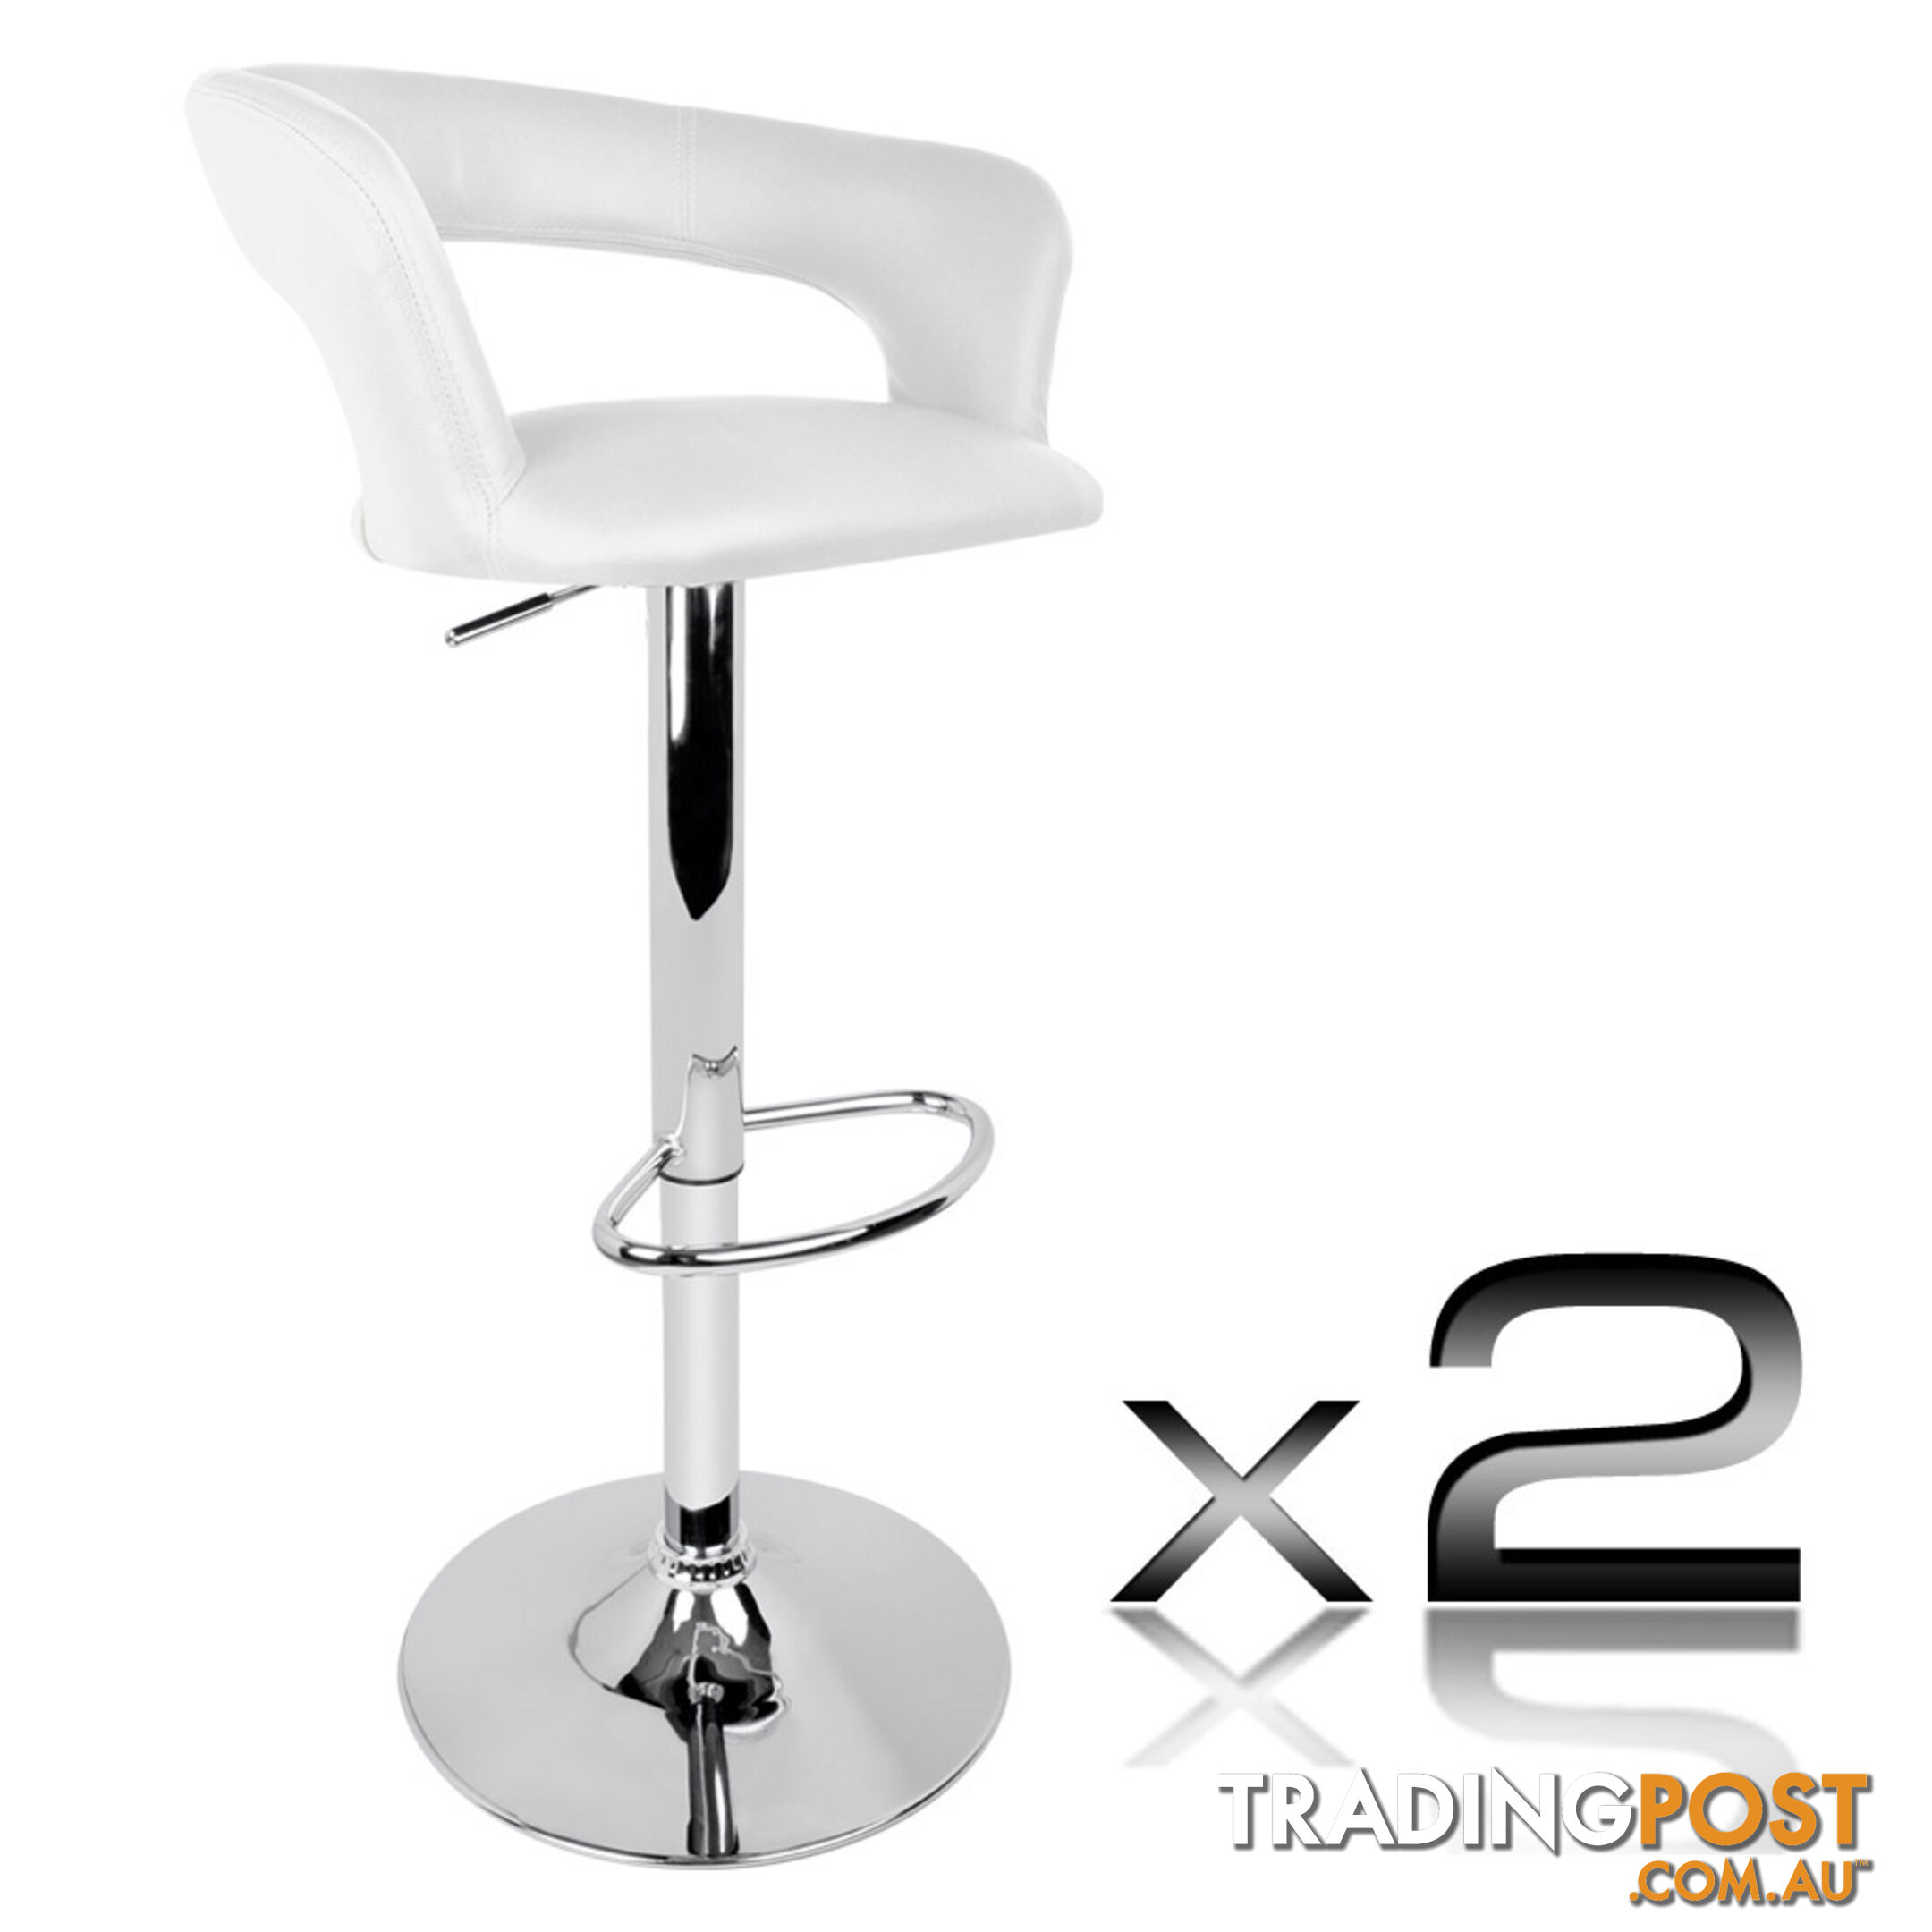 2 x White PU Leather Modern Bar Stool Kitchen Office Chair Gas Lift Barstools